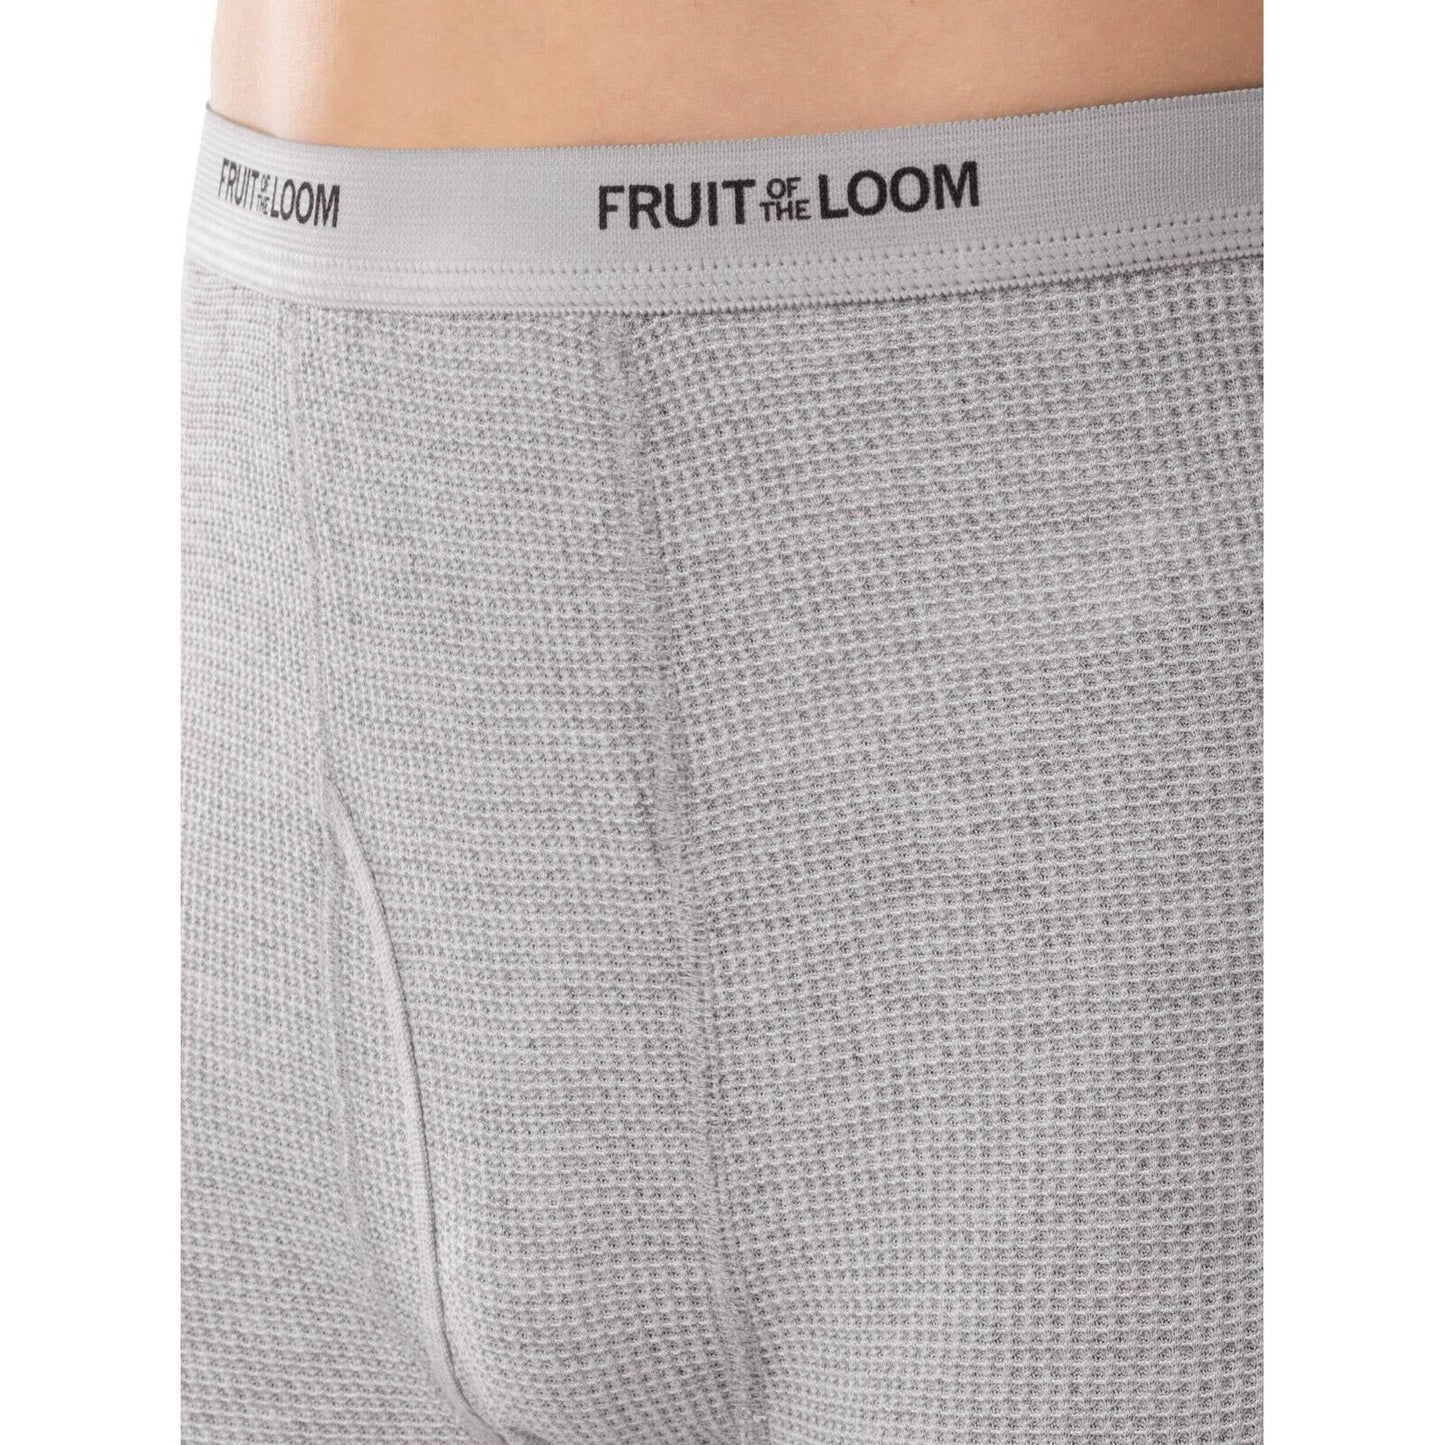 Fruit of the Loom Men's Thermal Waffle Baselayer Underwear Pant XL